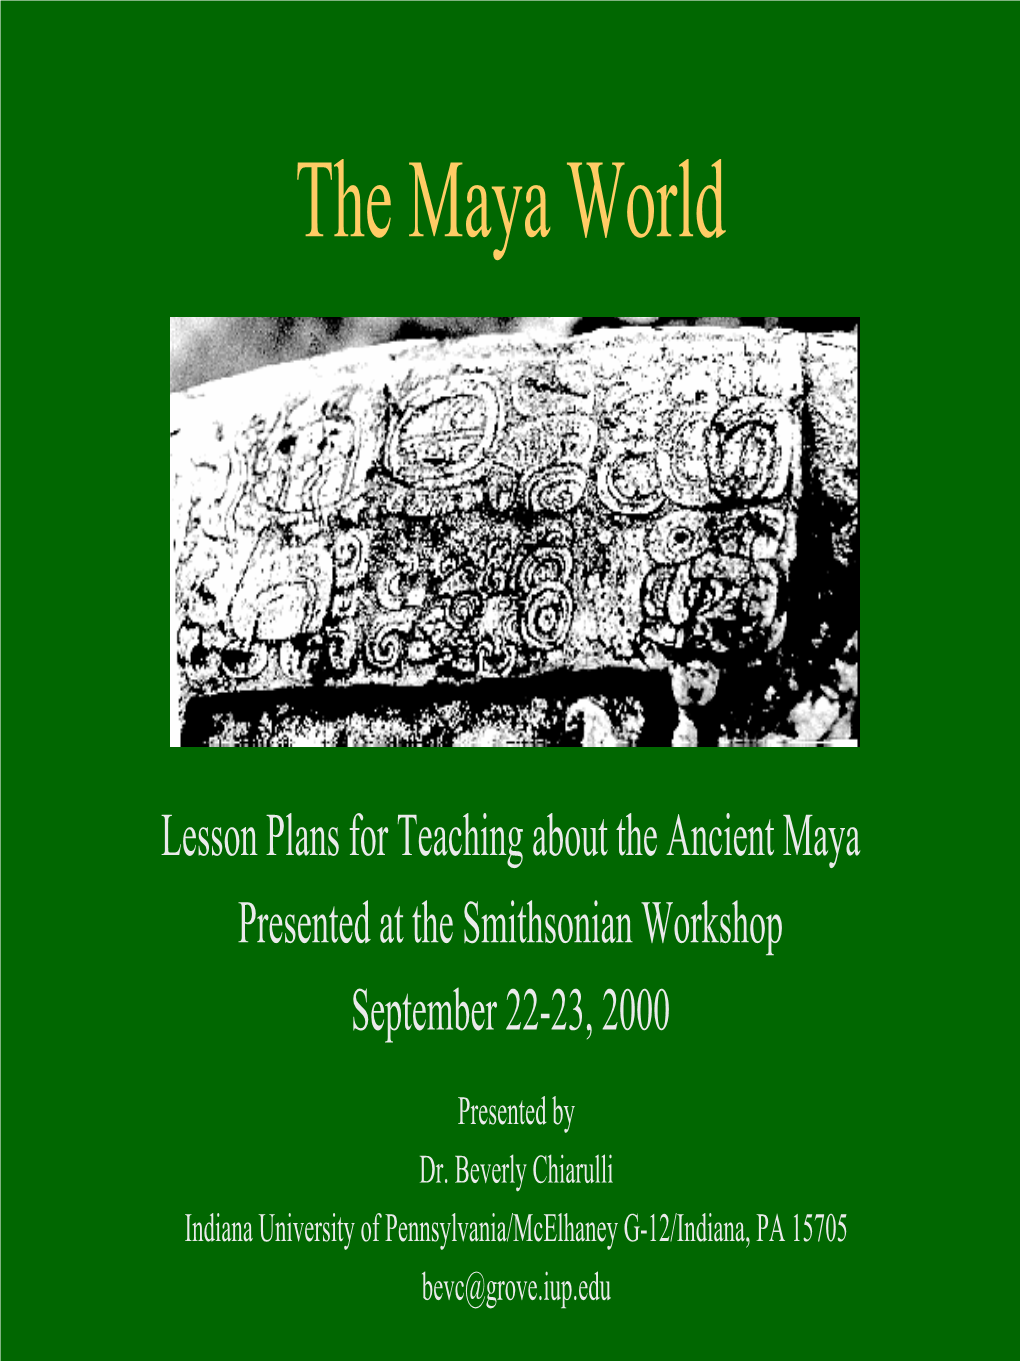 Supplement: Lesson Plans for Teaching About the Ancient Maya